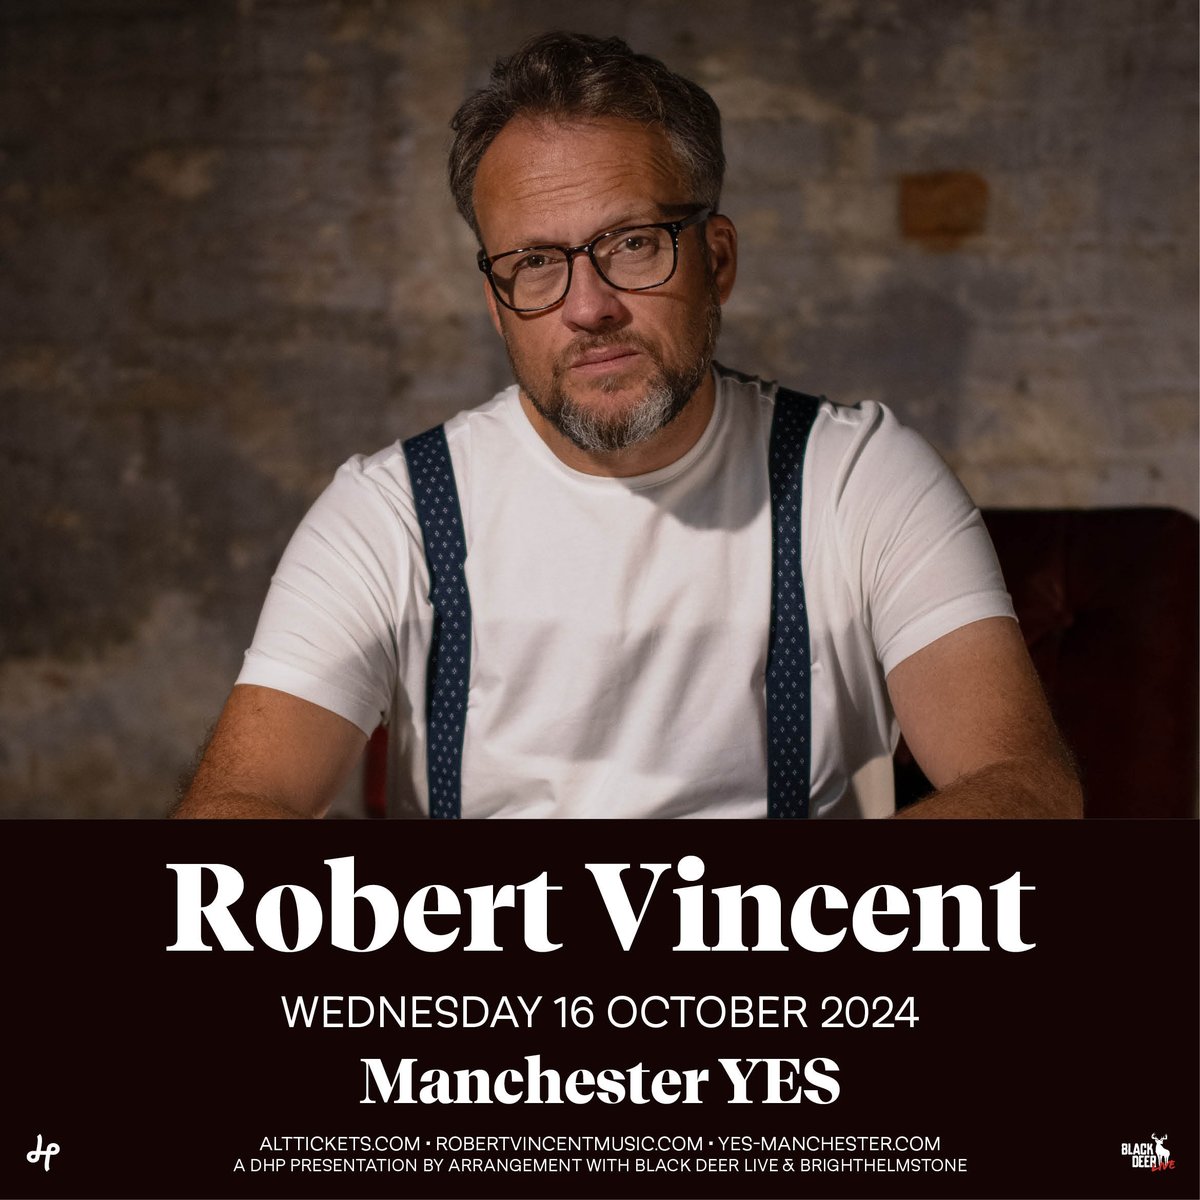 Maintaining his status as one of the most acclaimed voices in the UK Americana scene, @RobVincentMusic has just announced a show at @yes_mcr in Manchester on 16th October! Tickets on sale Tuesday at 10am, set a reminder now: tinyurl.com/bdd8df4e